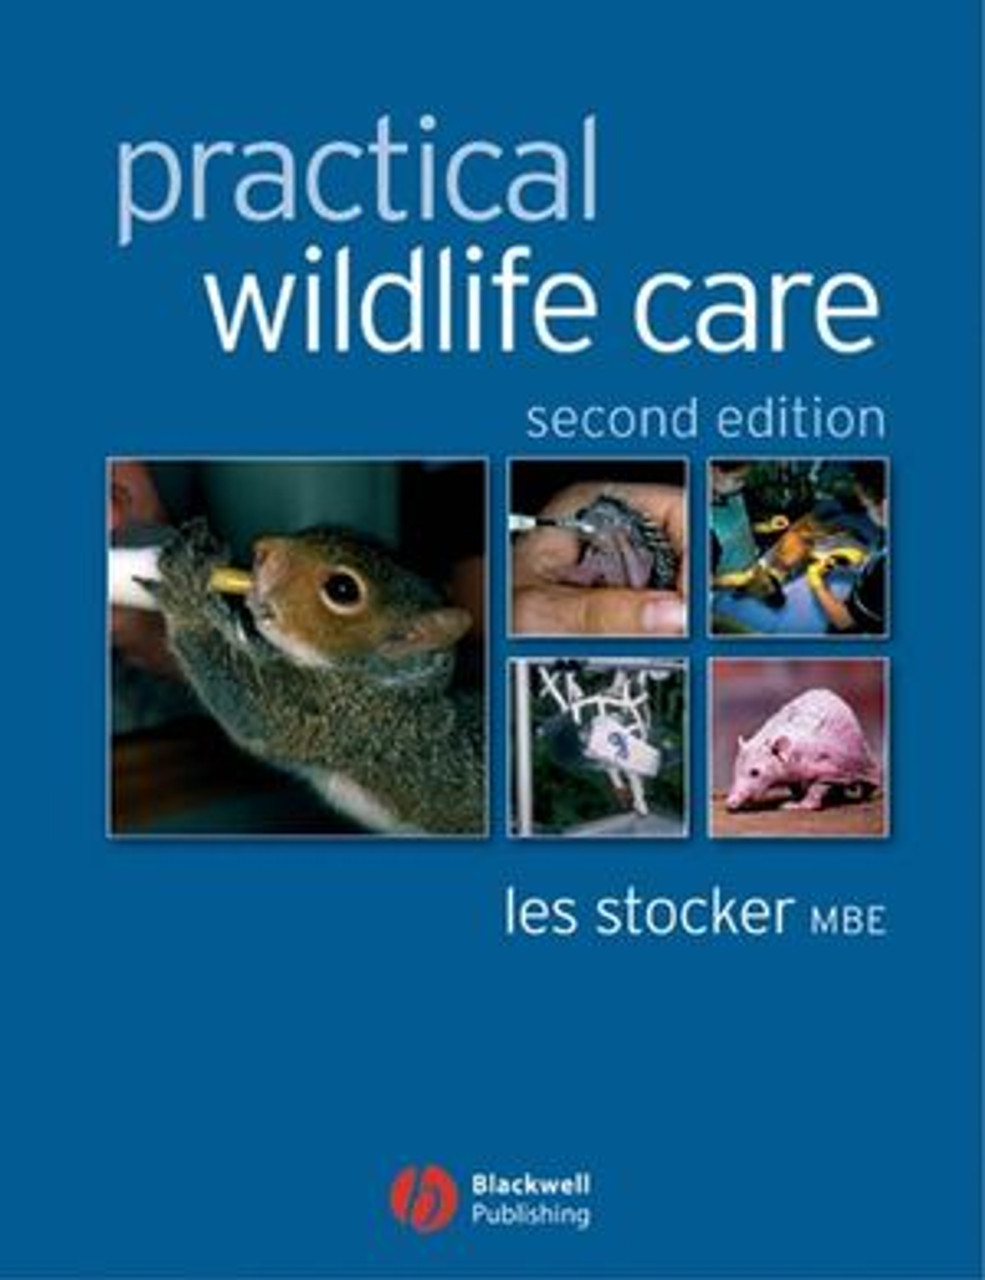 Practical Wildlife Care Second Edition by Les Stocker